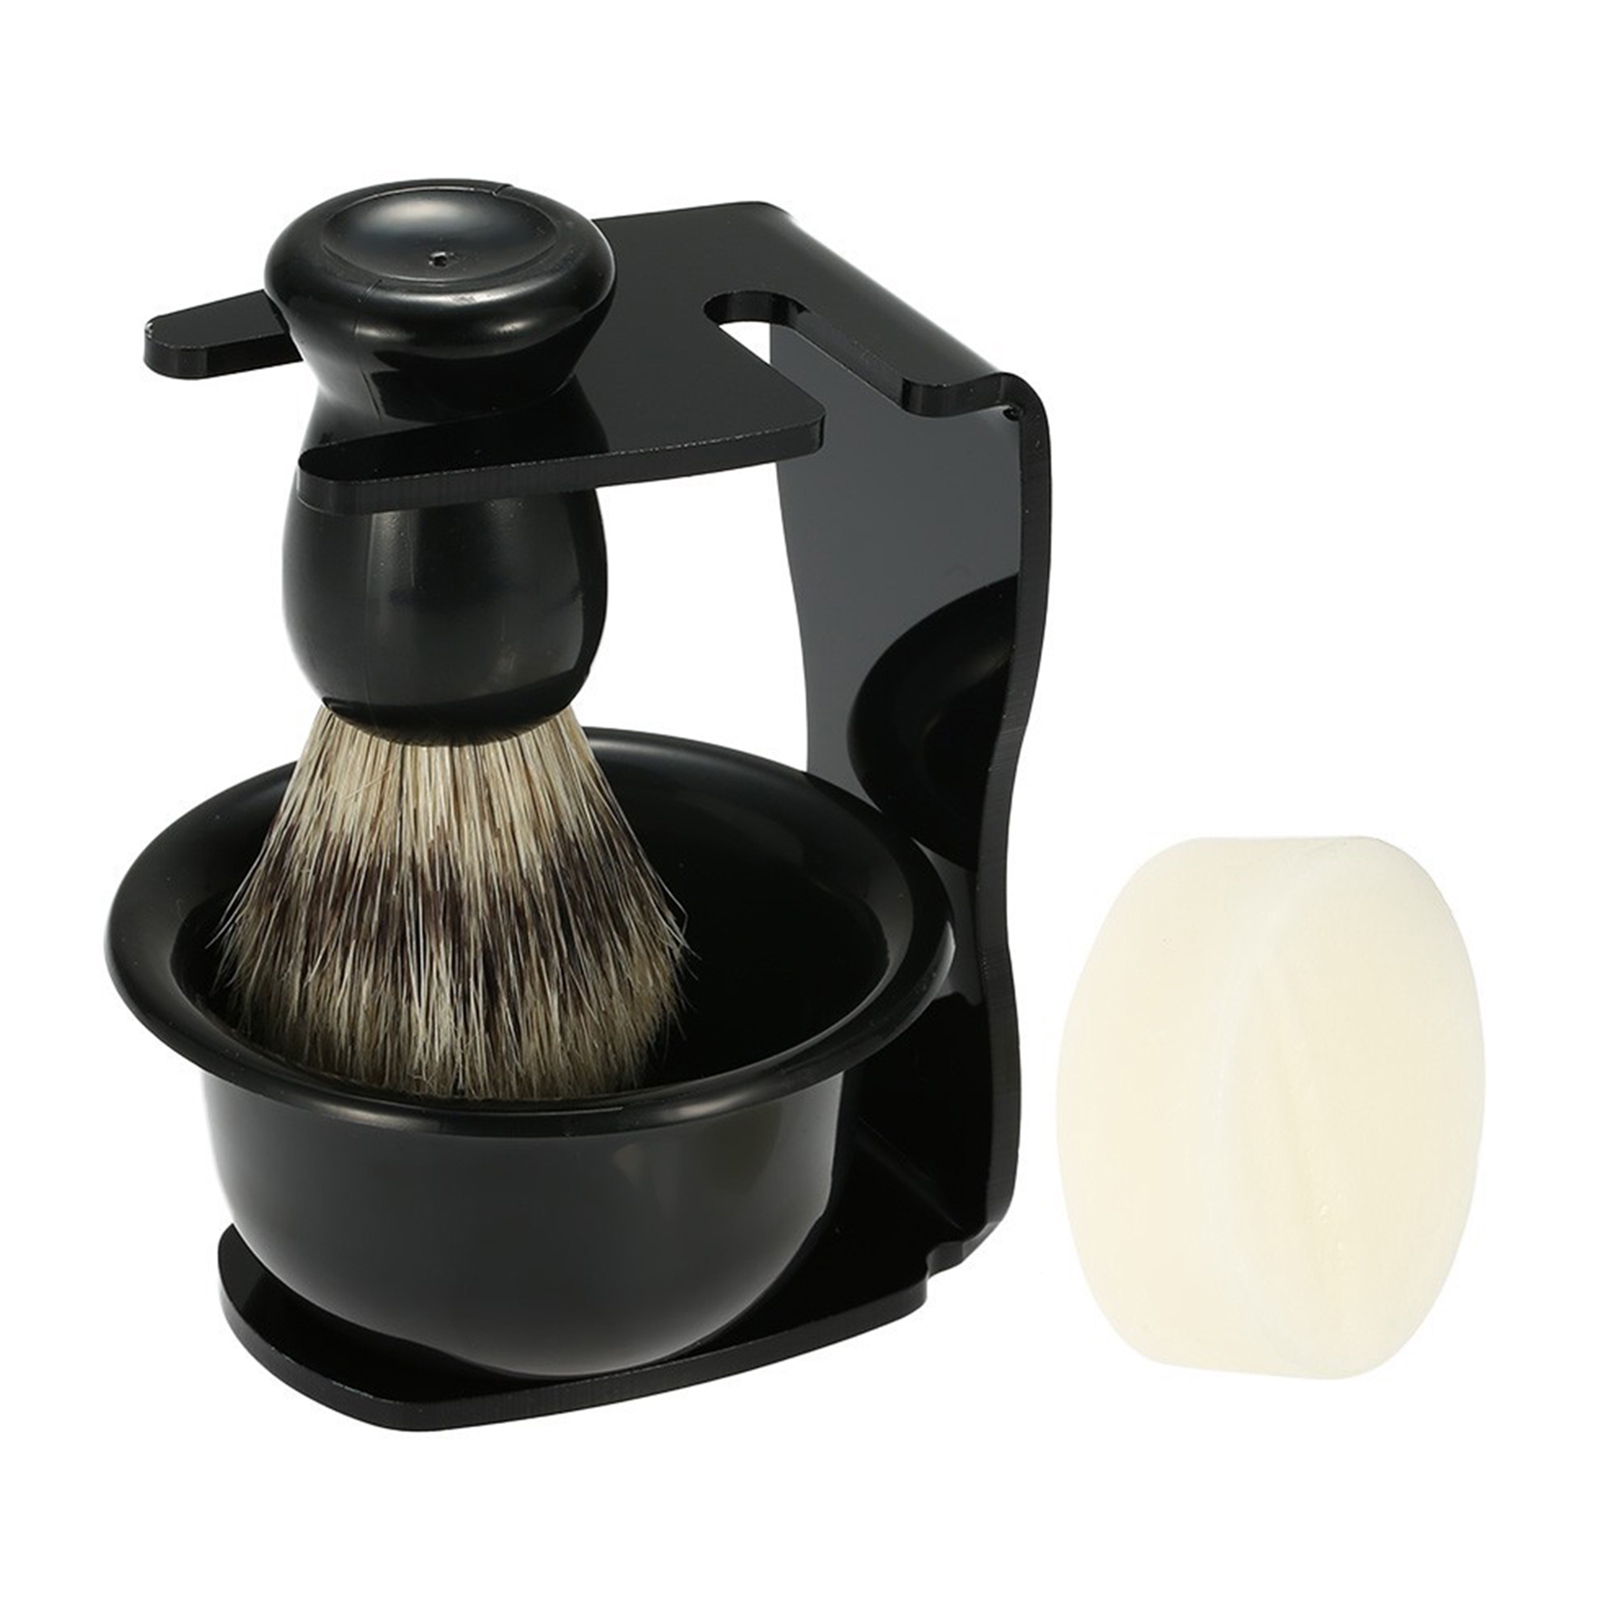 Professional Shaving Set for Home Use